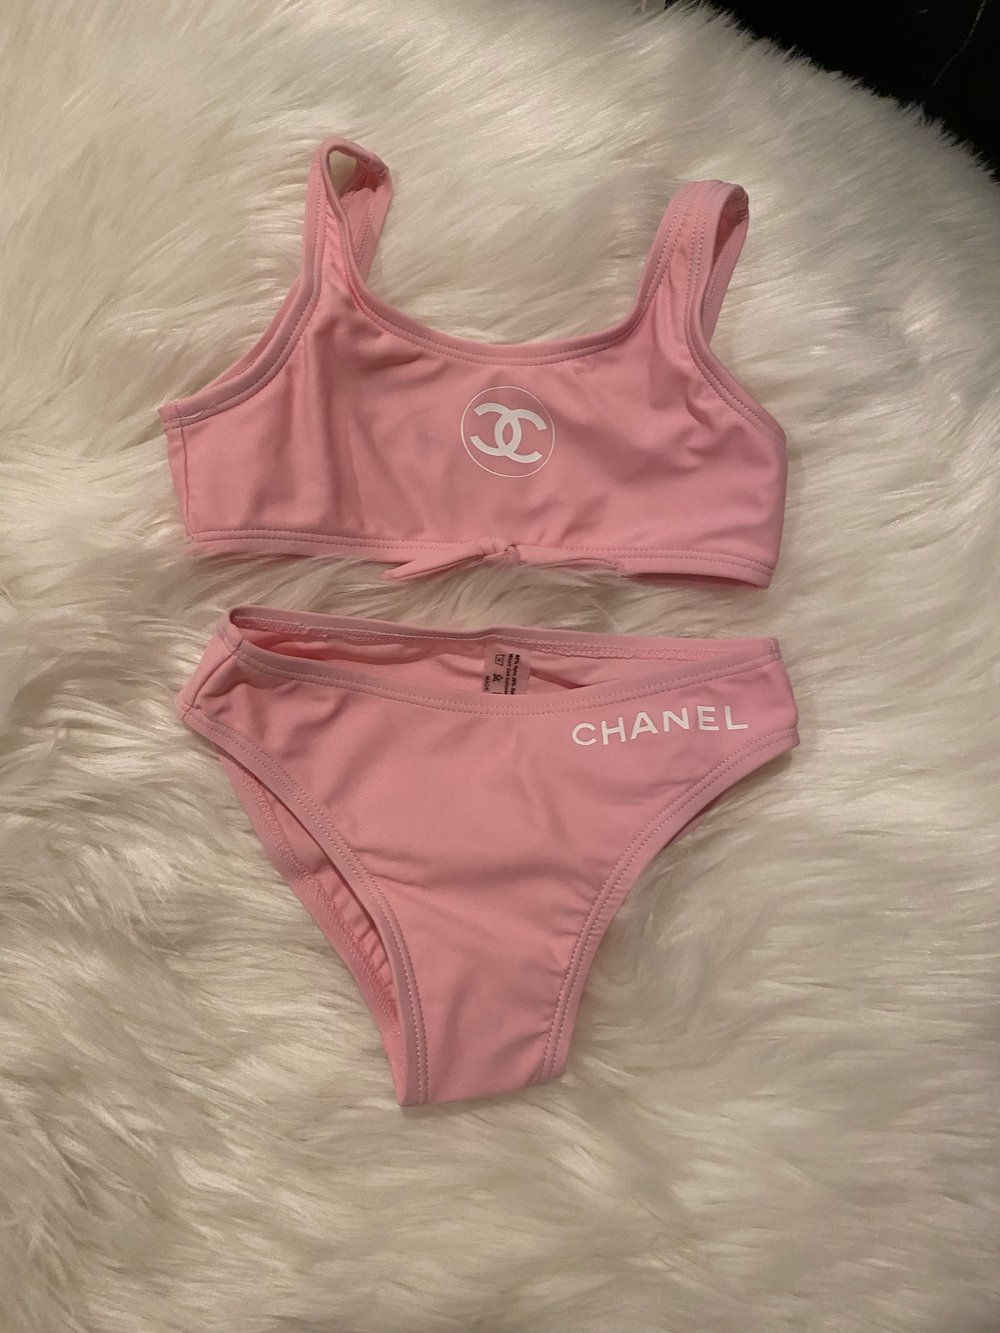 Image of 2 piece Chanel bathing suit